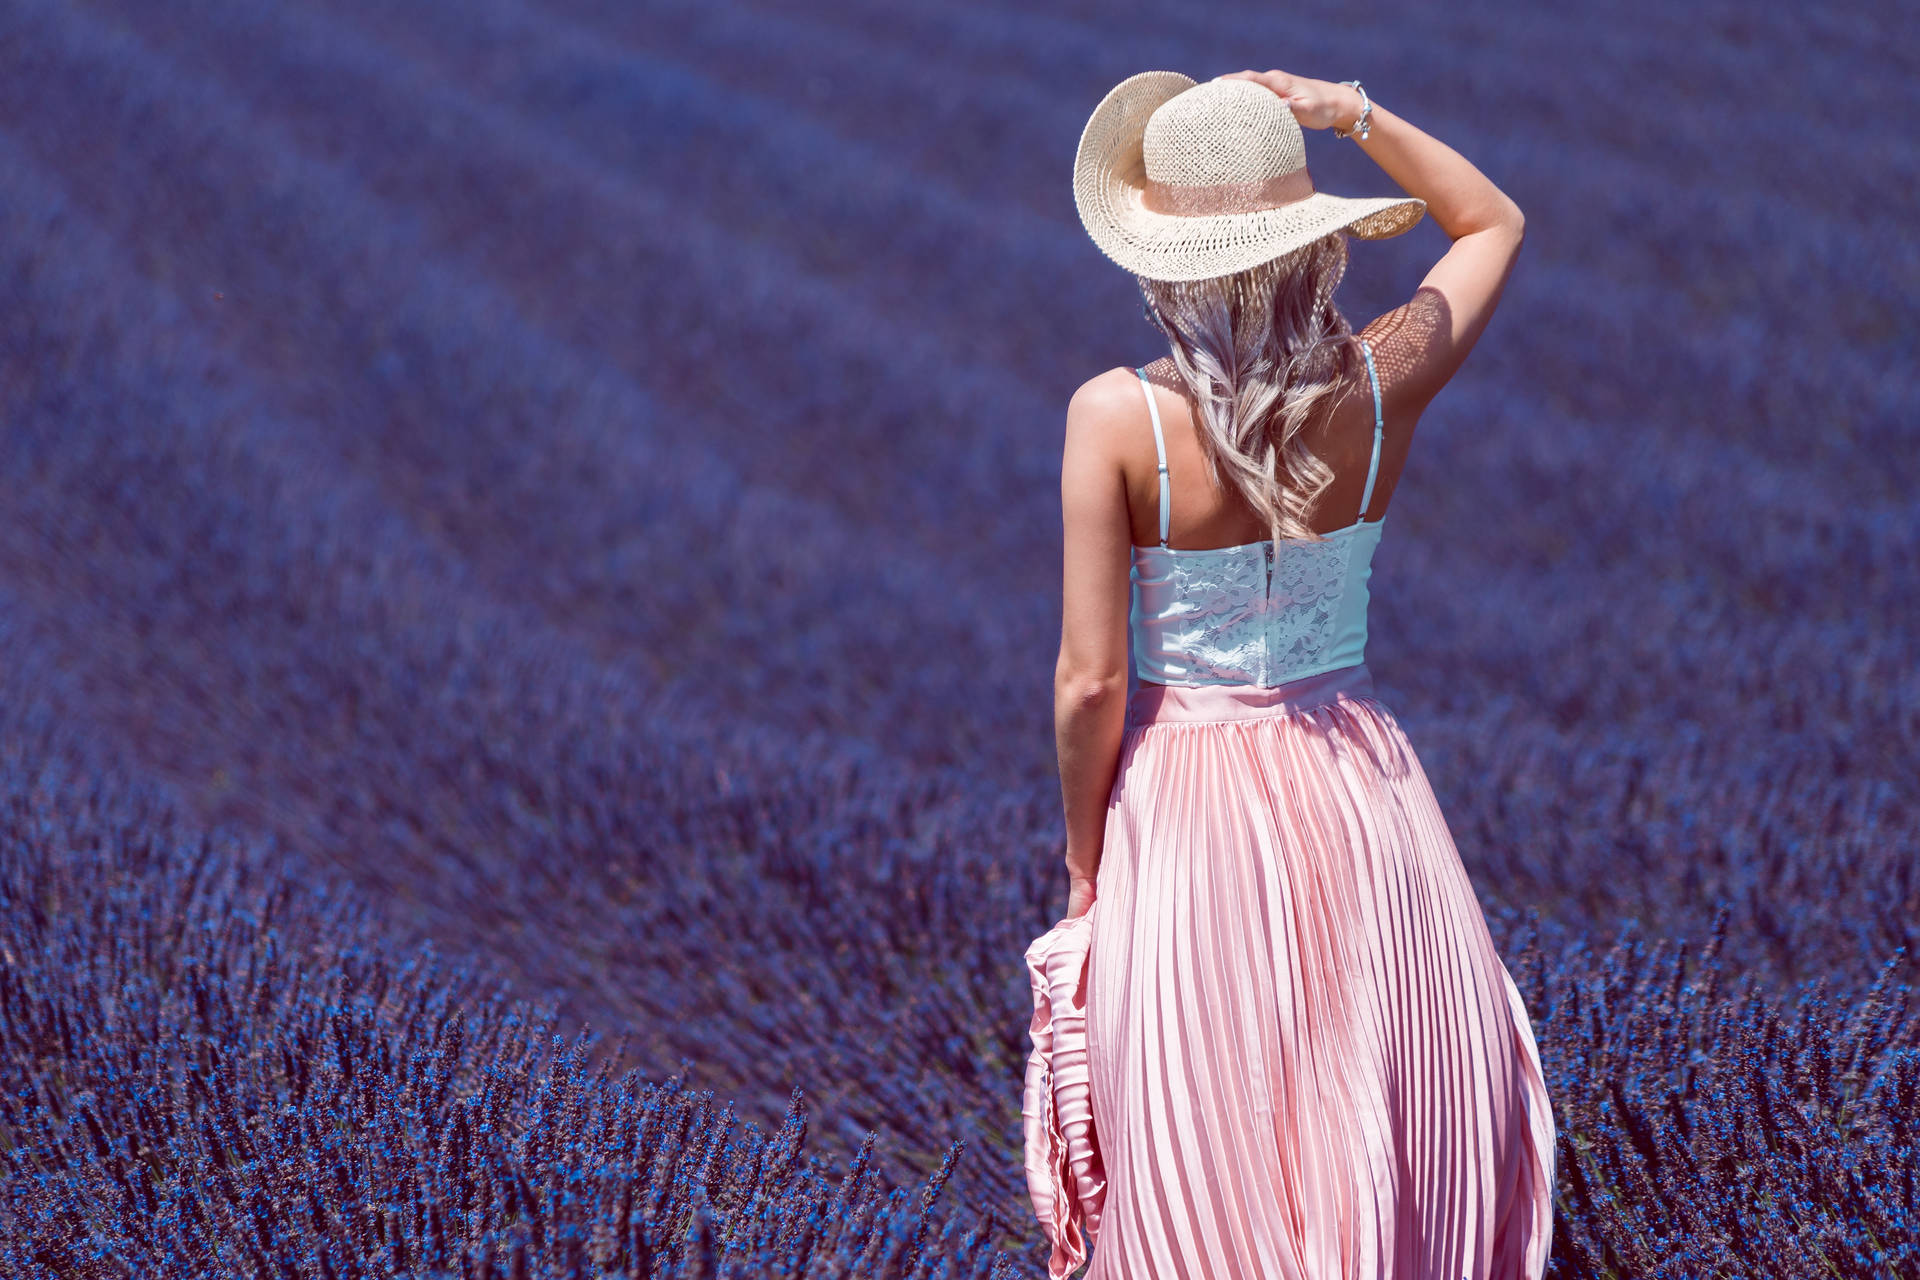 Lavender Aesthetic And Lady In The Field Wallpaper